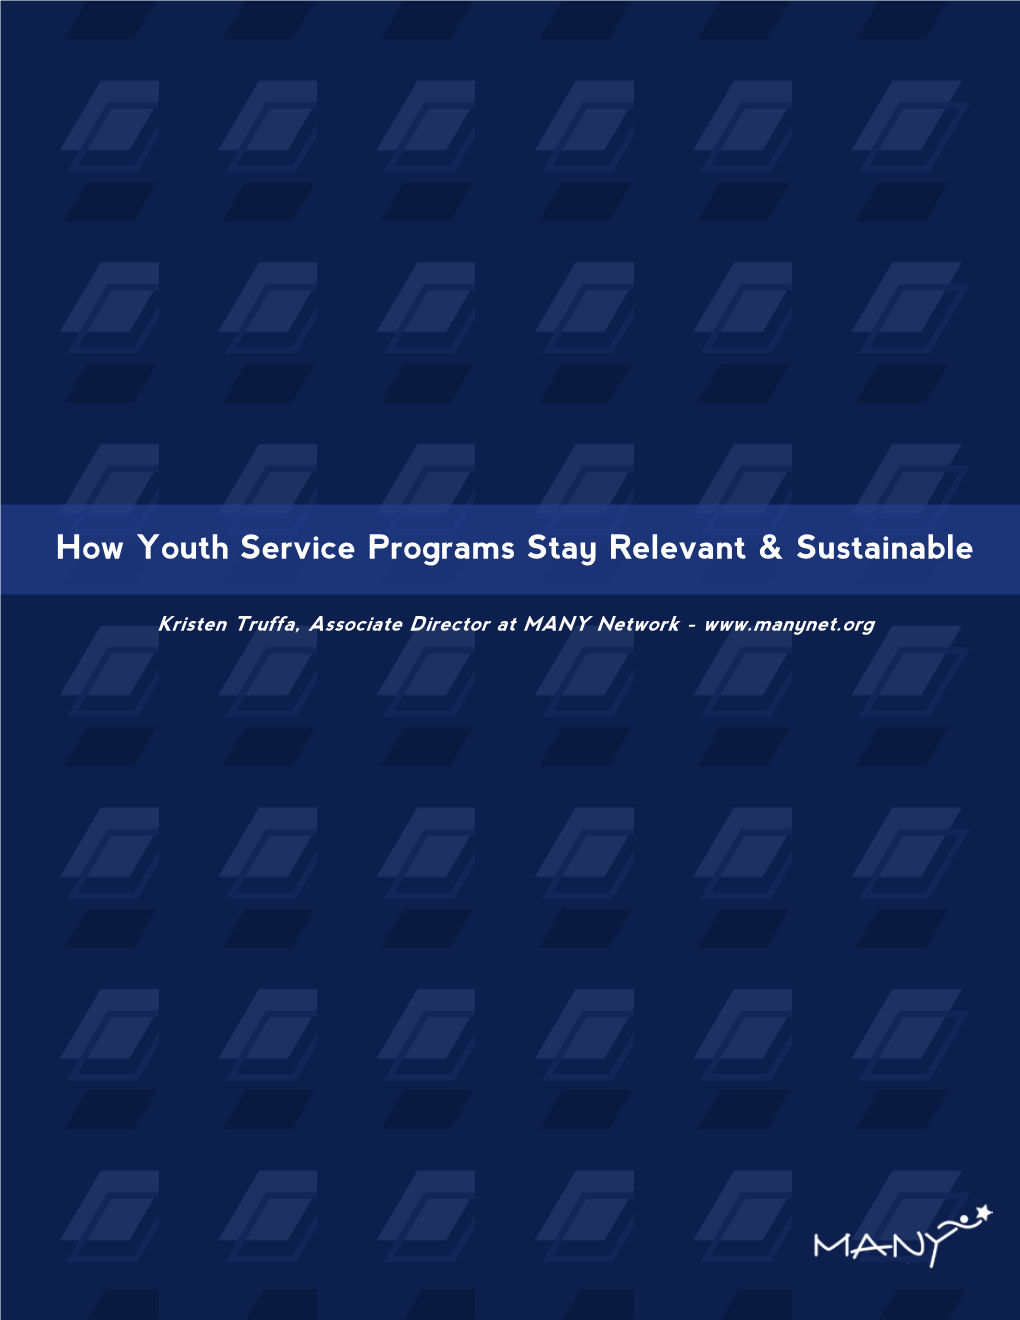 How Youth Service Programs Stay Relevant & Sustainable